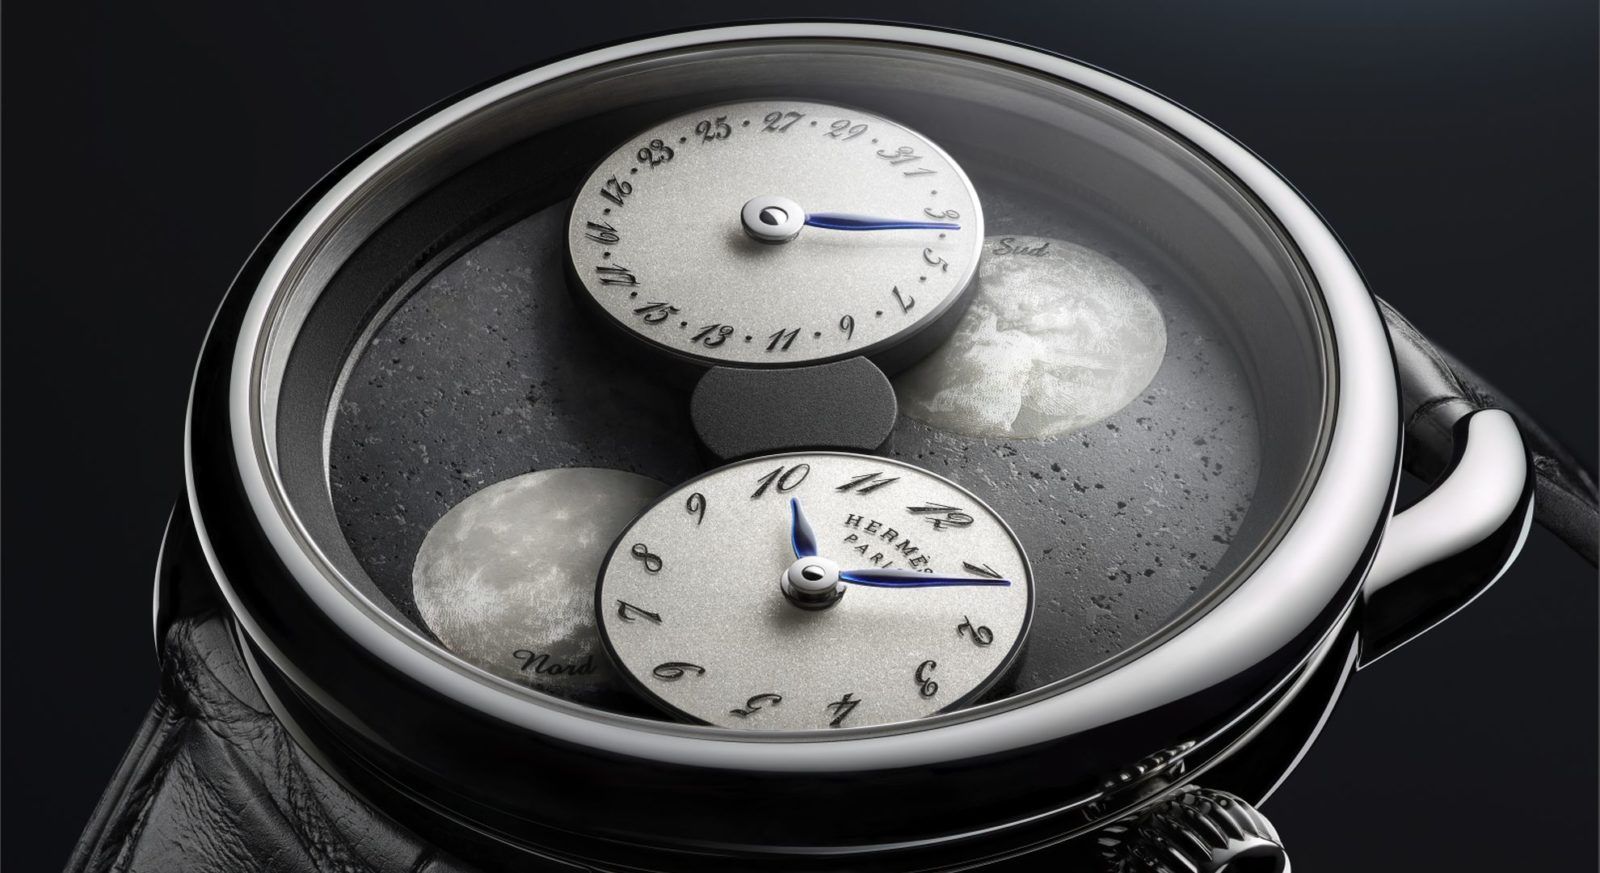 These are the new Hermès novelties debuted at Watches & Wonders 2020